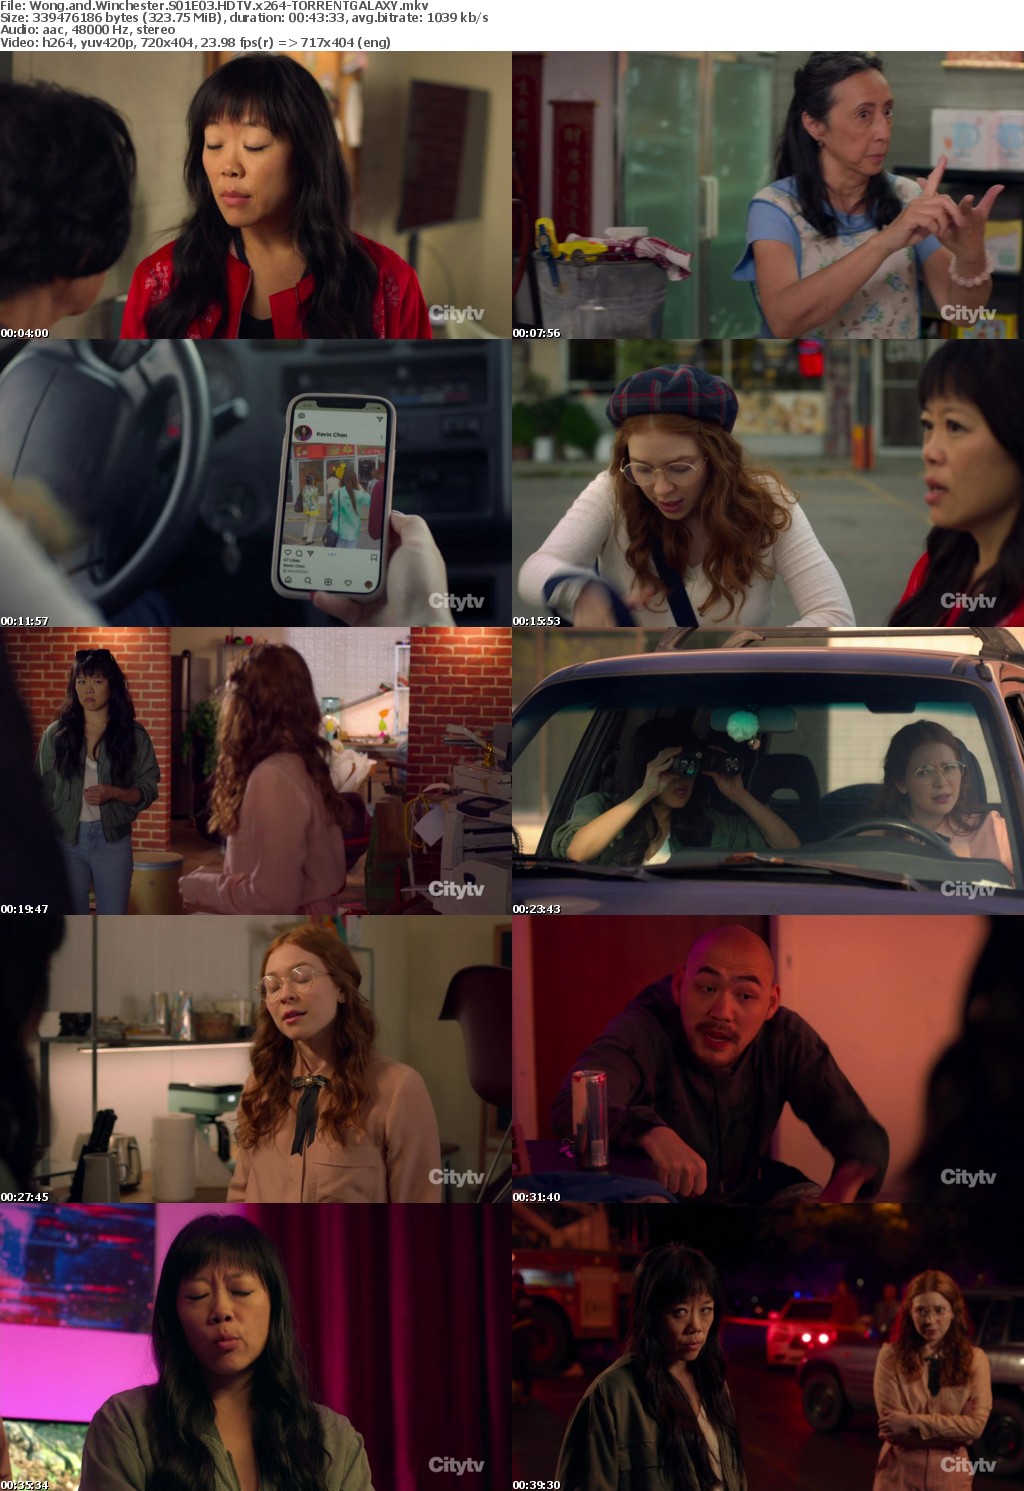 Wong and Winchester S01E03 HDTV x264-GALAXY